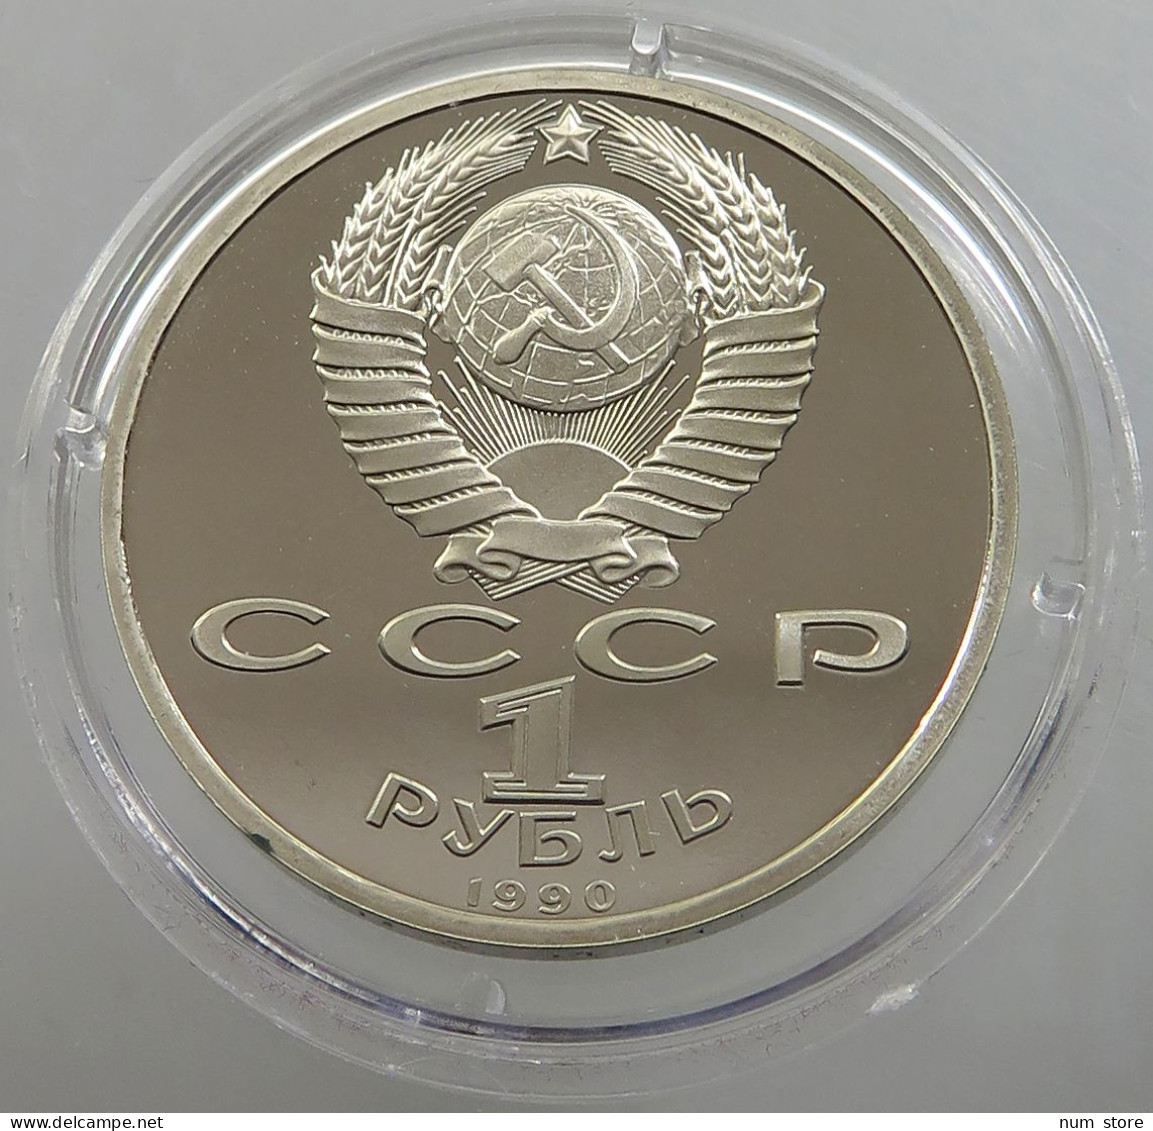 RUSSIA USSR 1 ROUBLE 1990 ZHUKOV PROOF #sm14 0497 - Russia